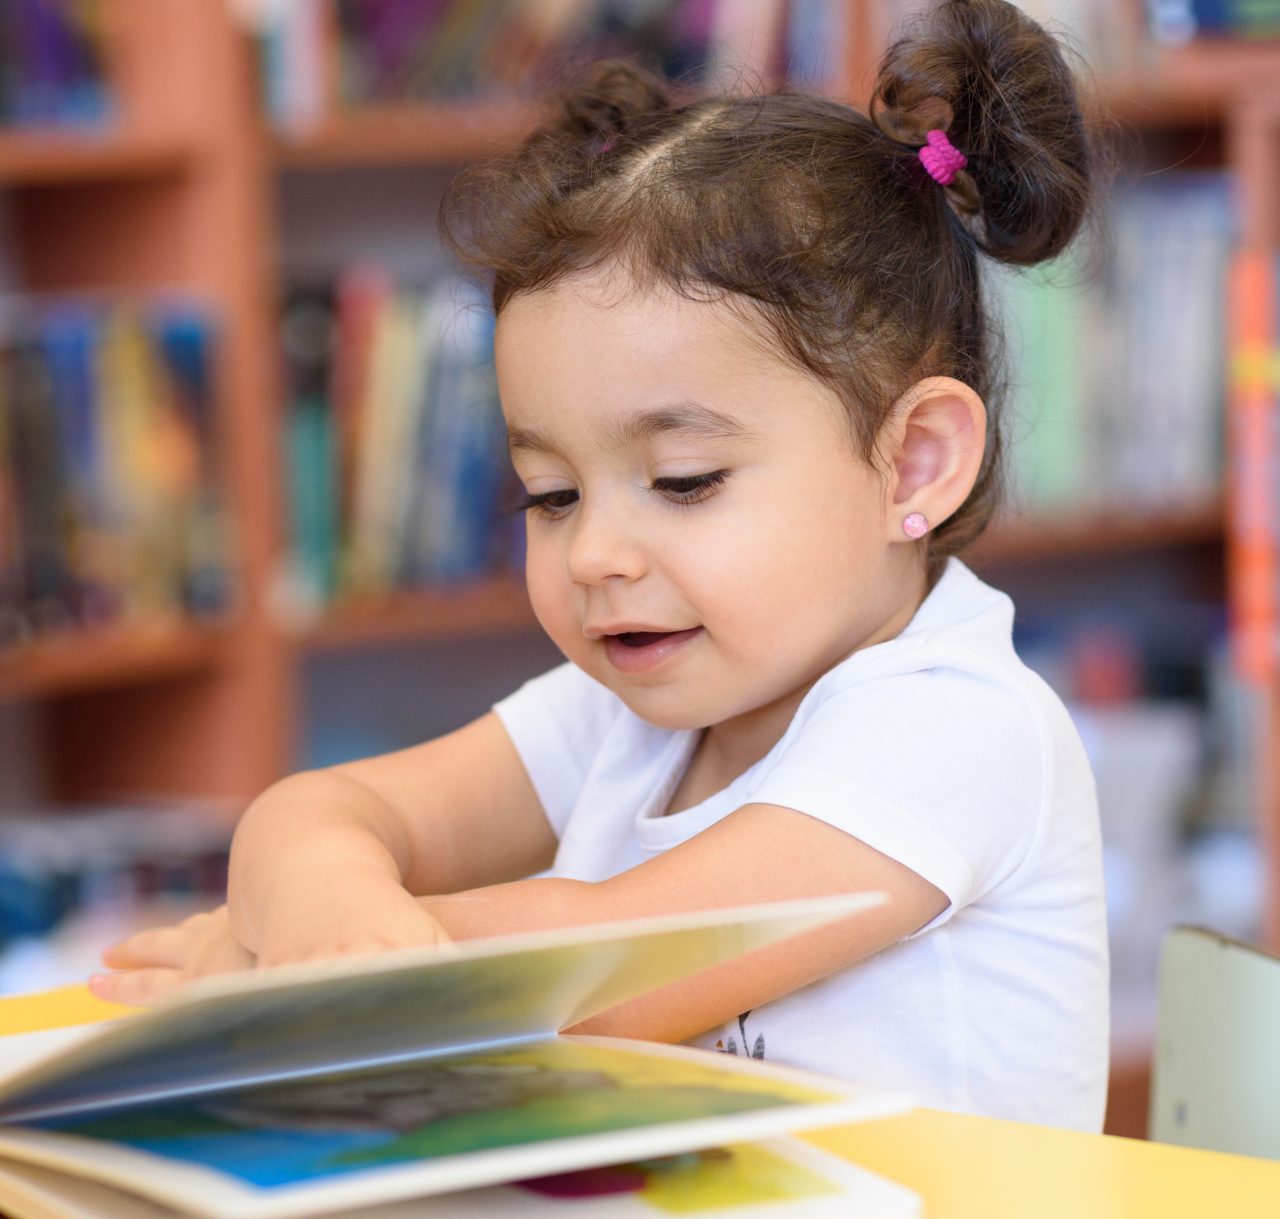 Little Girl Indoors In Front Of Books. Cute Young Toddler Sitting On A Chair Near Table and Reading Book. Child reads in a bookstore, surrounded by colorful books. Library, Shop, Shelving In Home.